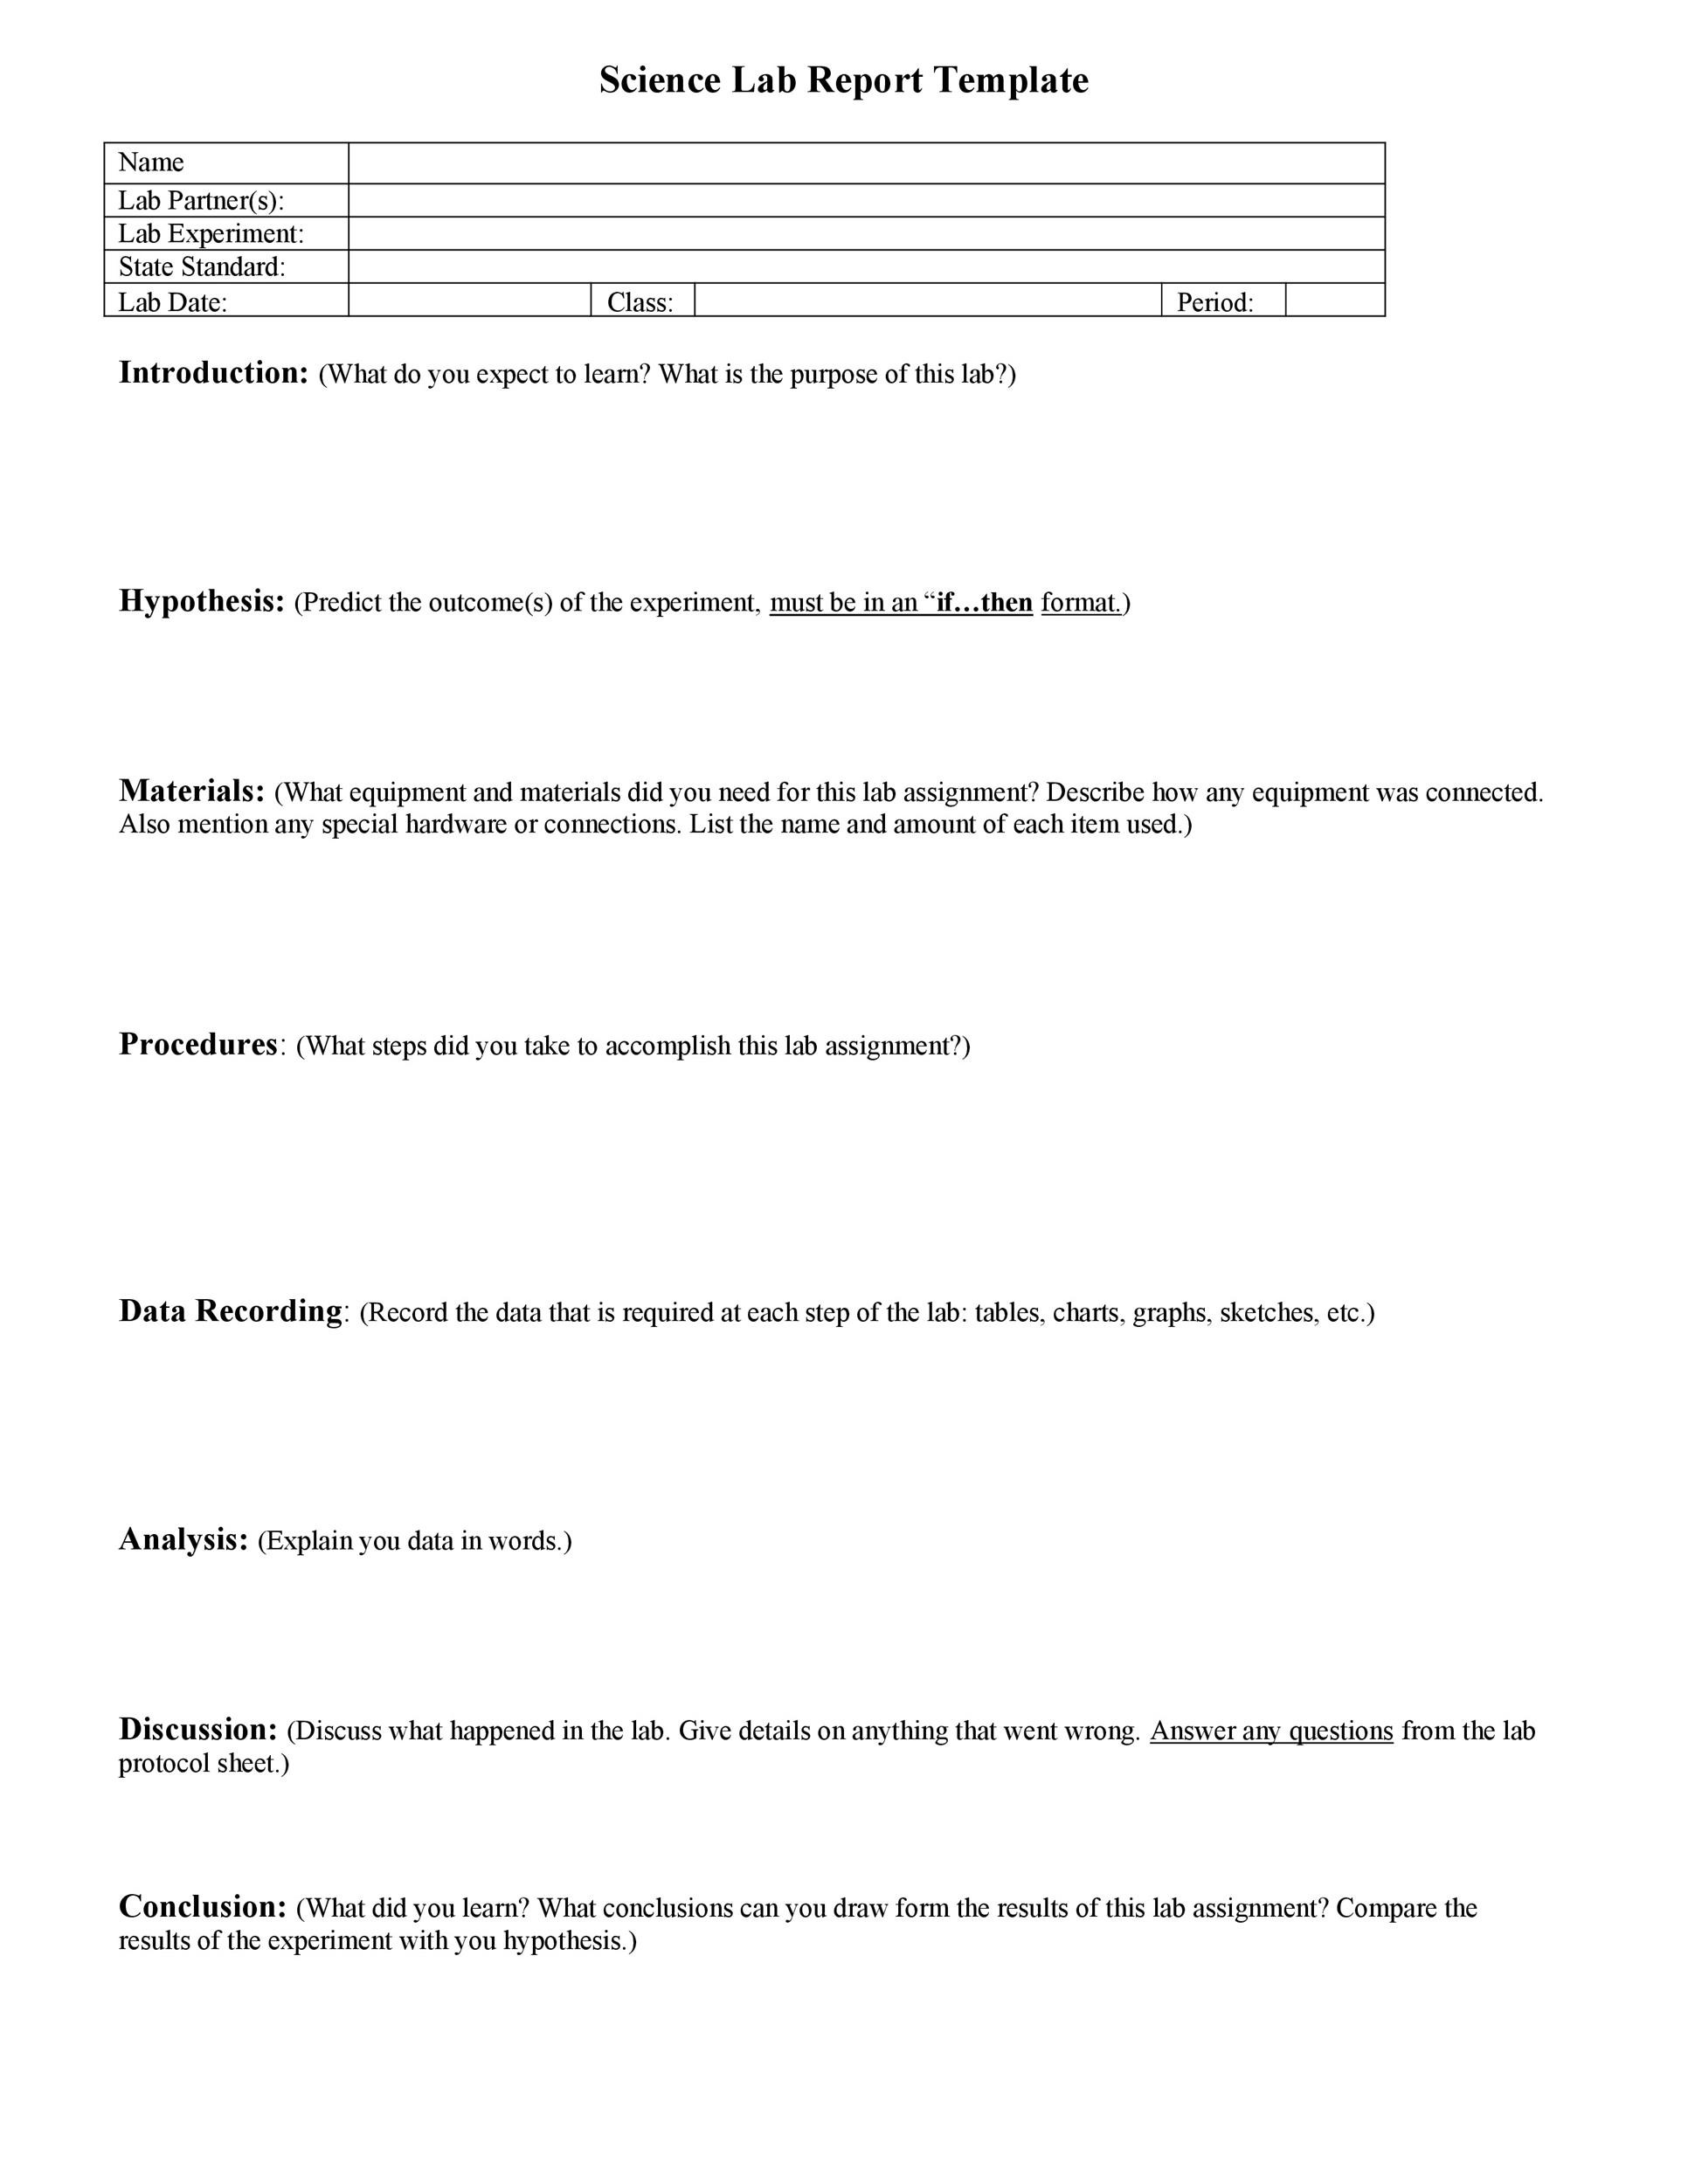 Free lab report template 01